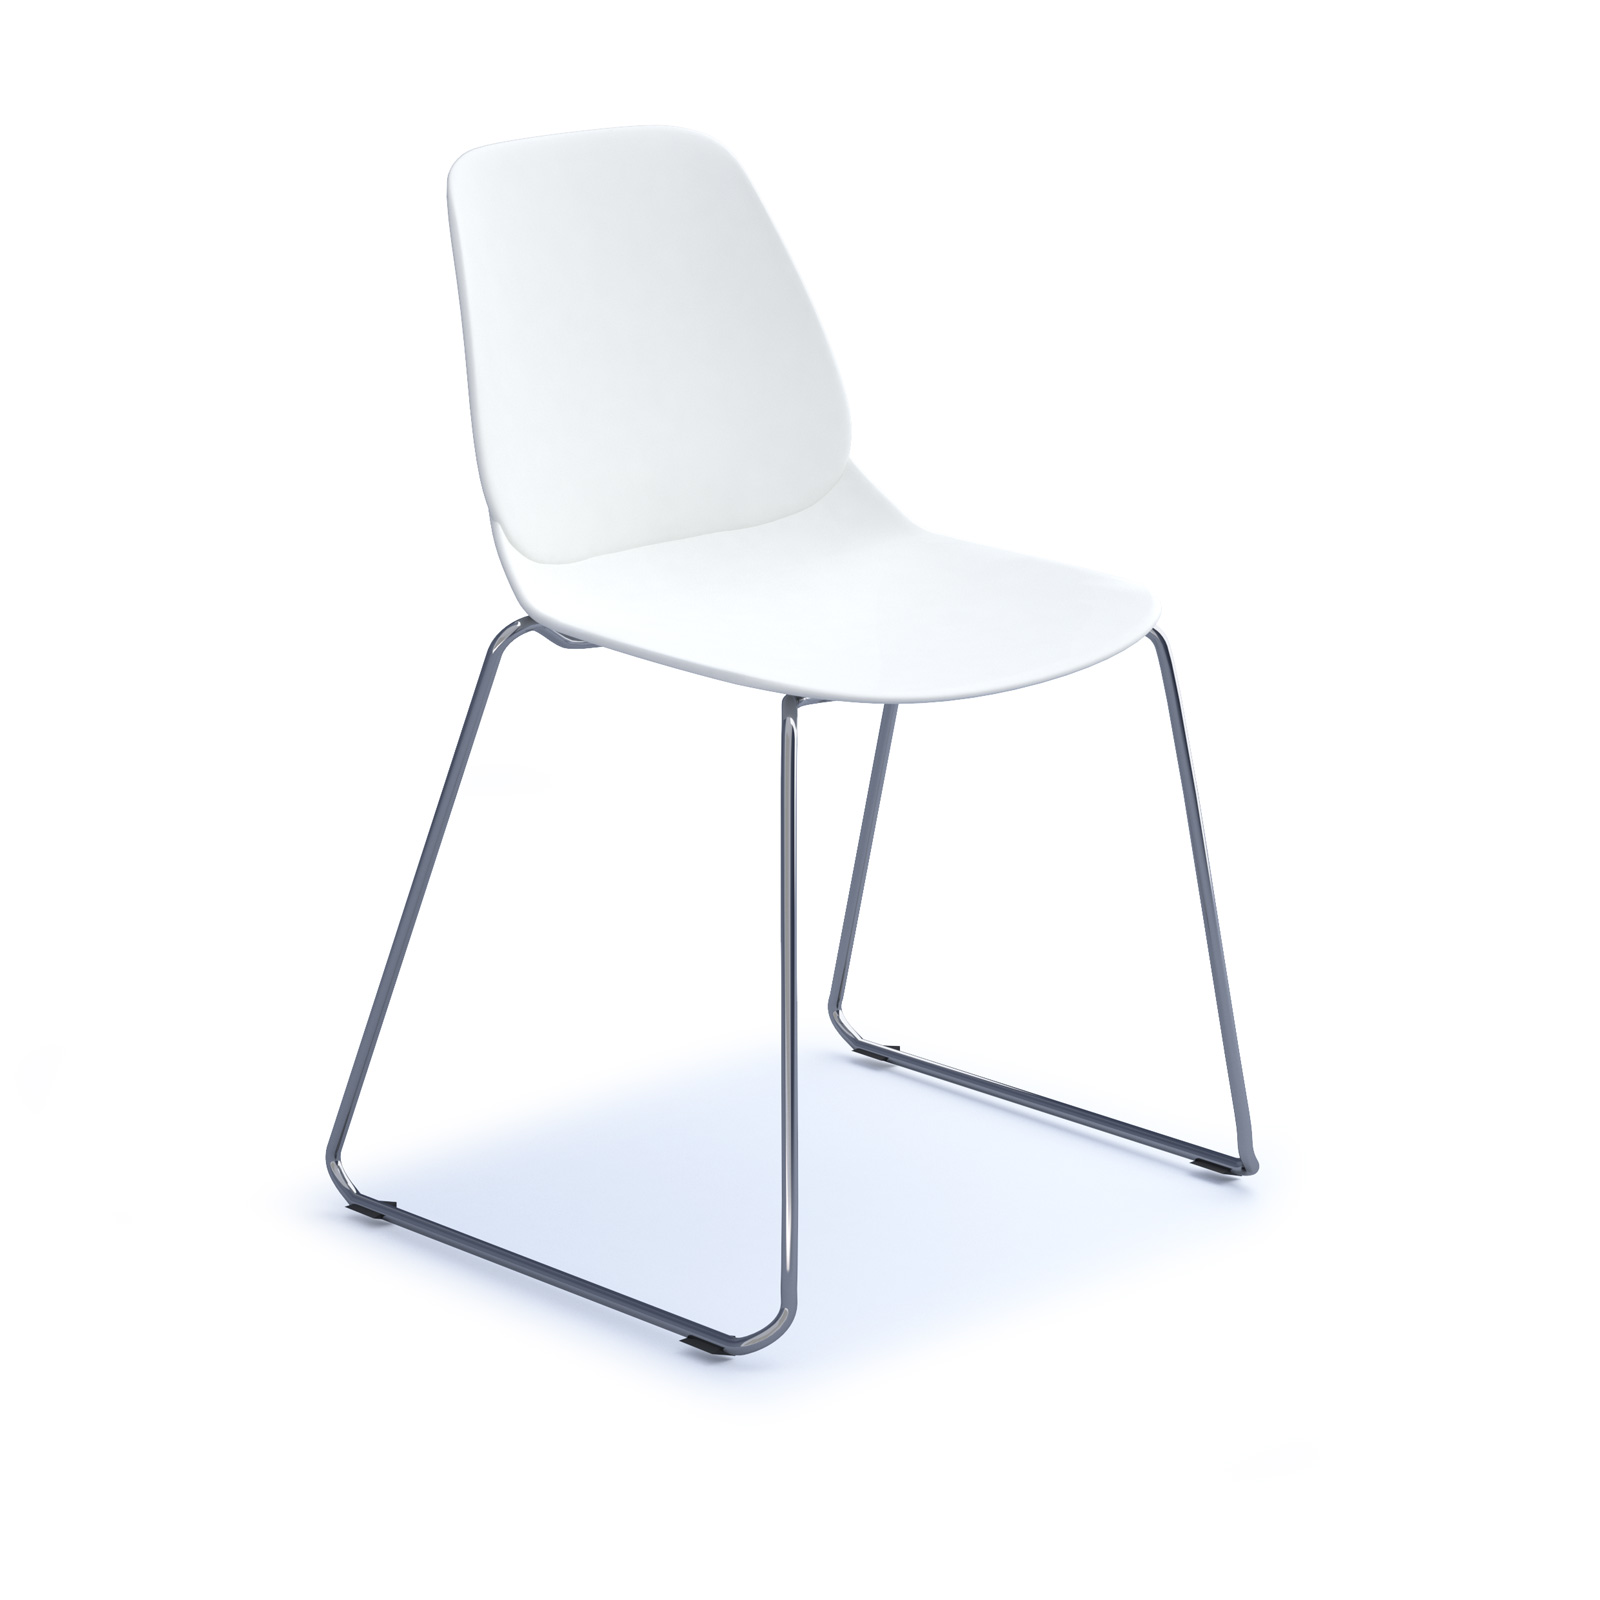 Strut multi-purpose chair with chrome sled frame